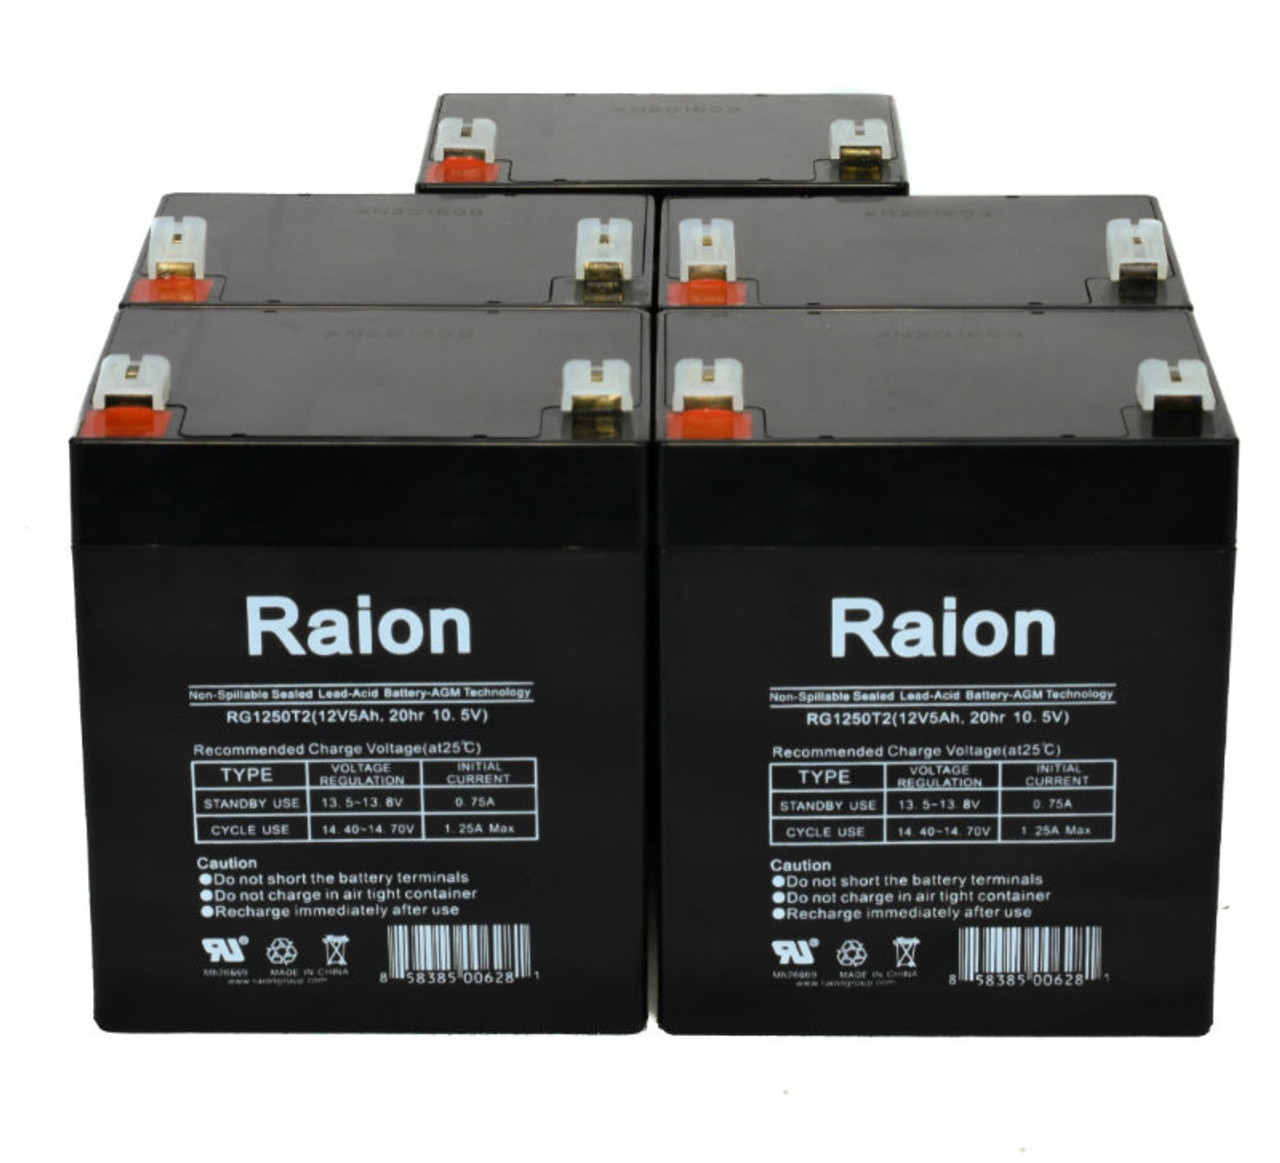 Raion Power 12V 5Ah RG1250T2 Replacement Lead Acid Battery for TLV1250F2 - 5 Pack